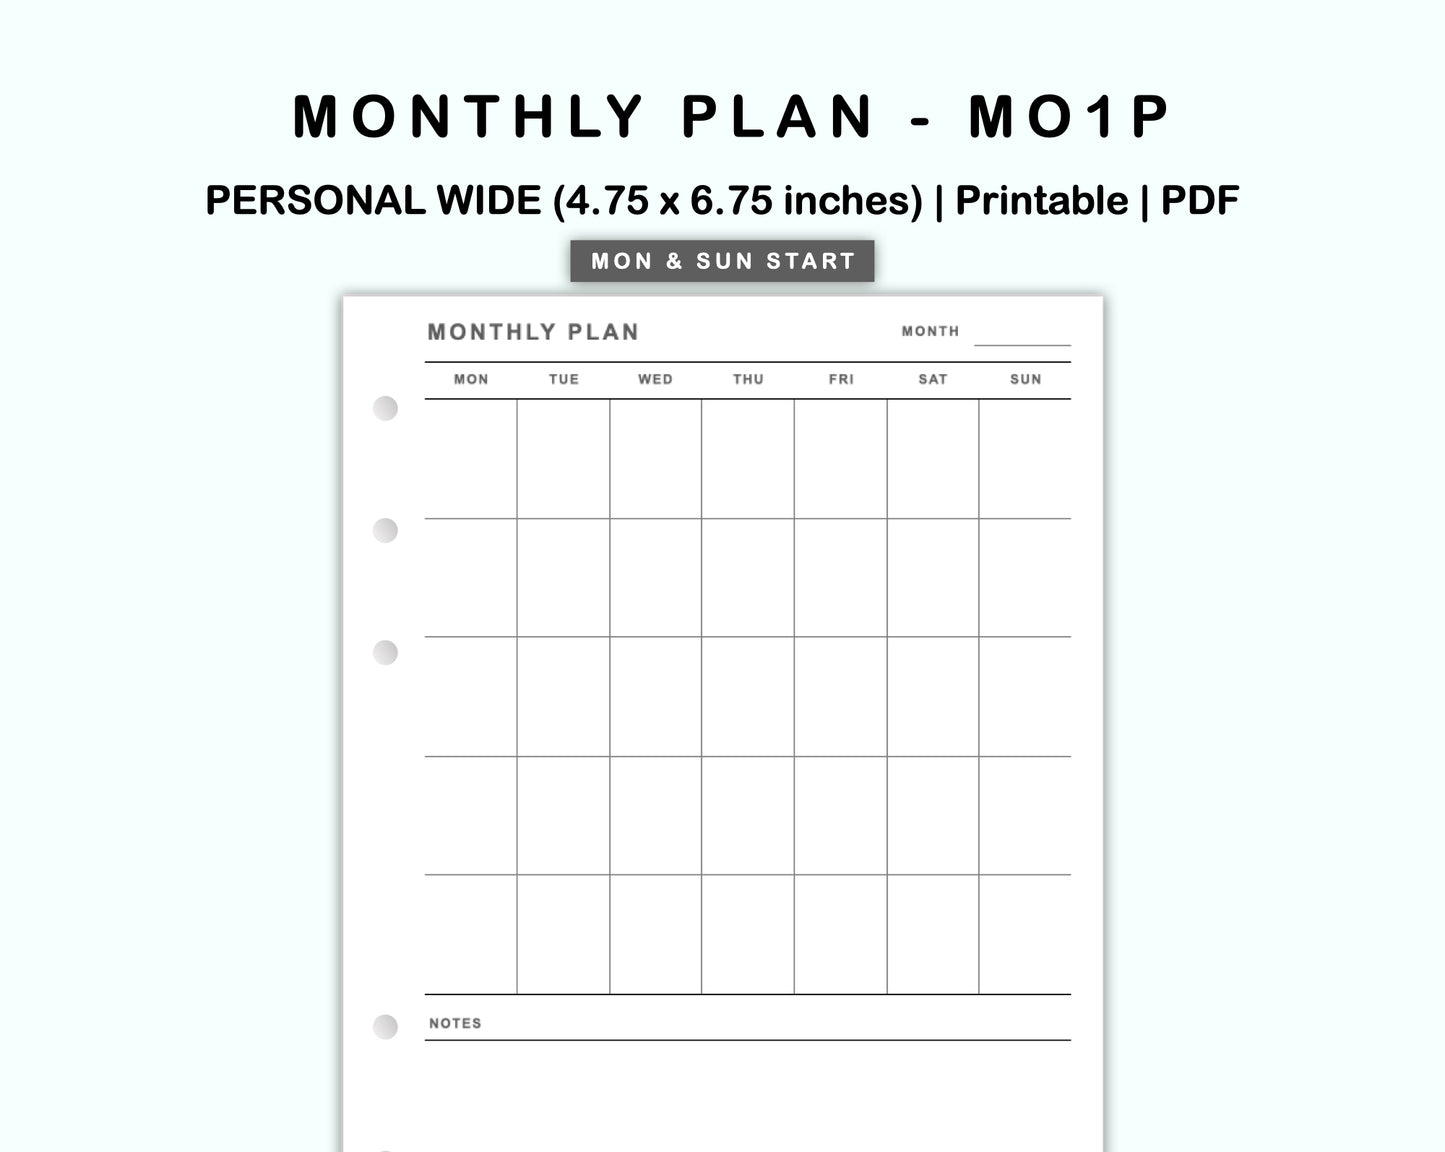 Personal Wide Inserts - Monthly Plan - MO1P